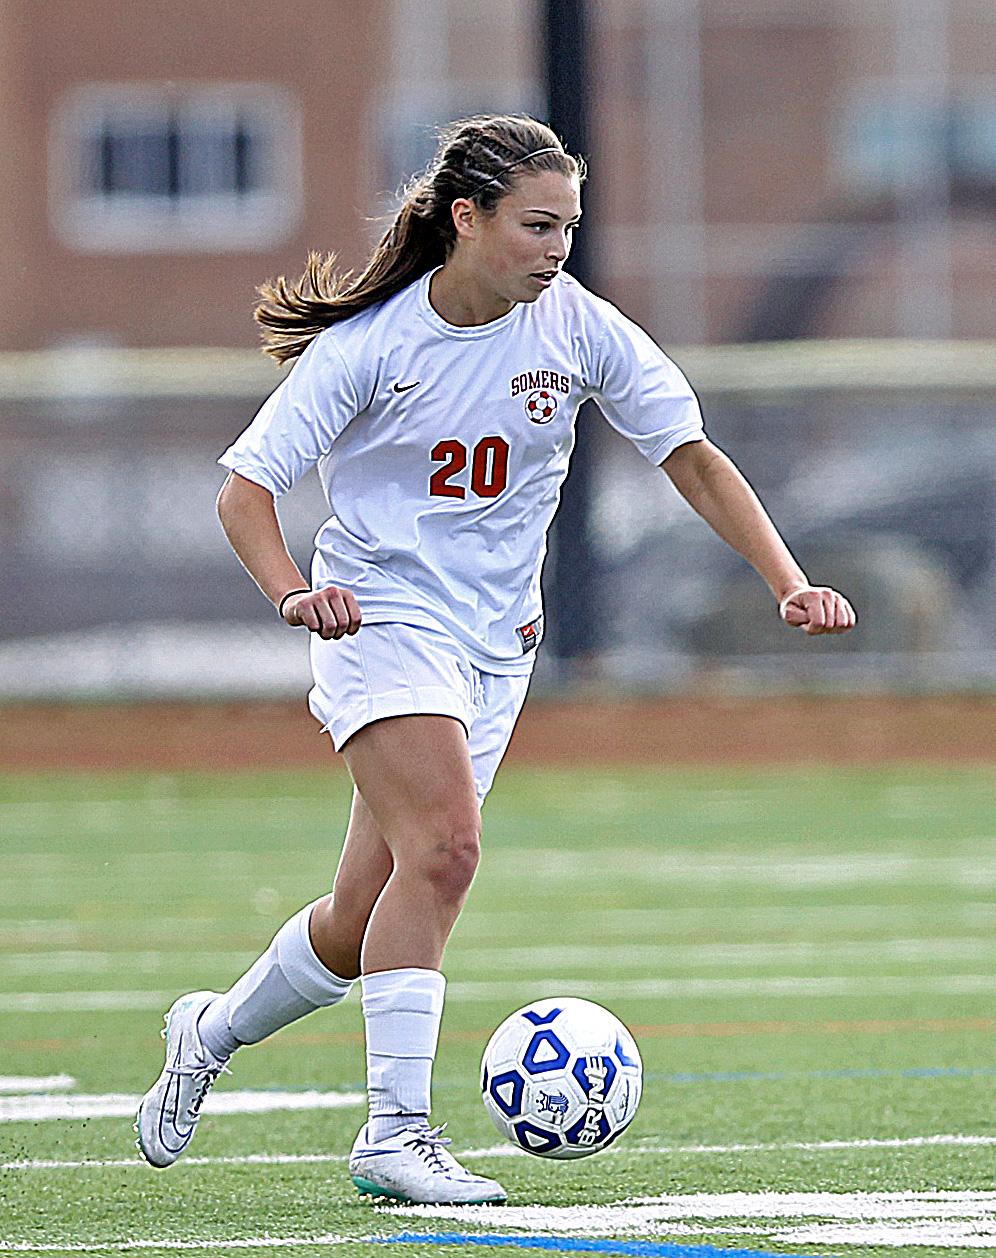 Somers captain Michelle Wienecke unleashed a torrid blend of skill and tenacity during NYS title run.